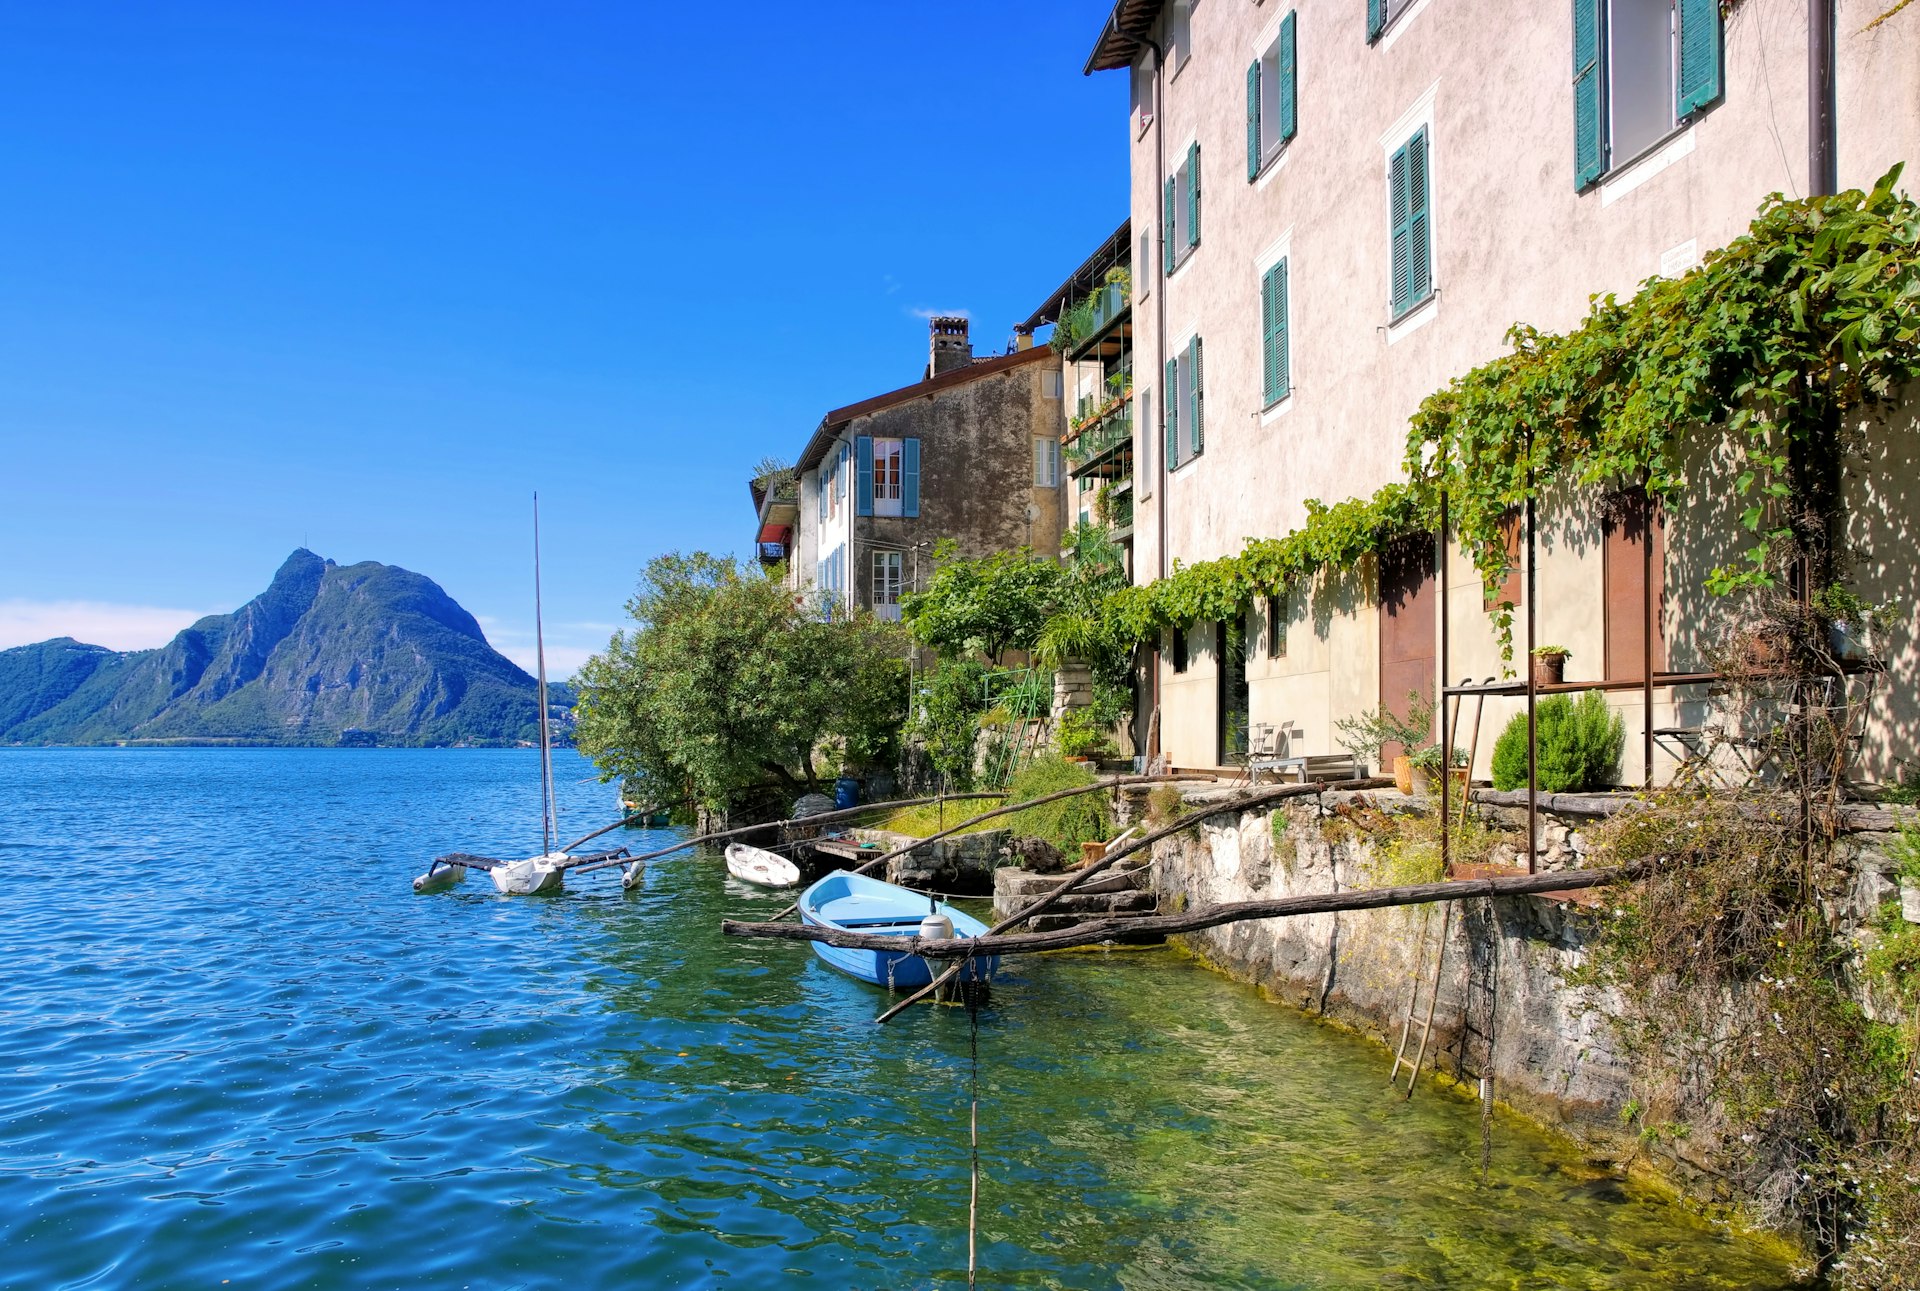 Boats and lake side buildings in the small village of Gandria on Lake Lugano.